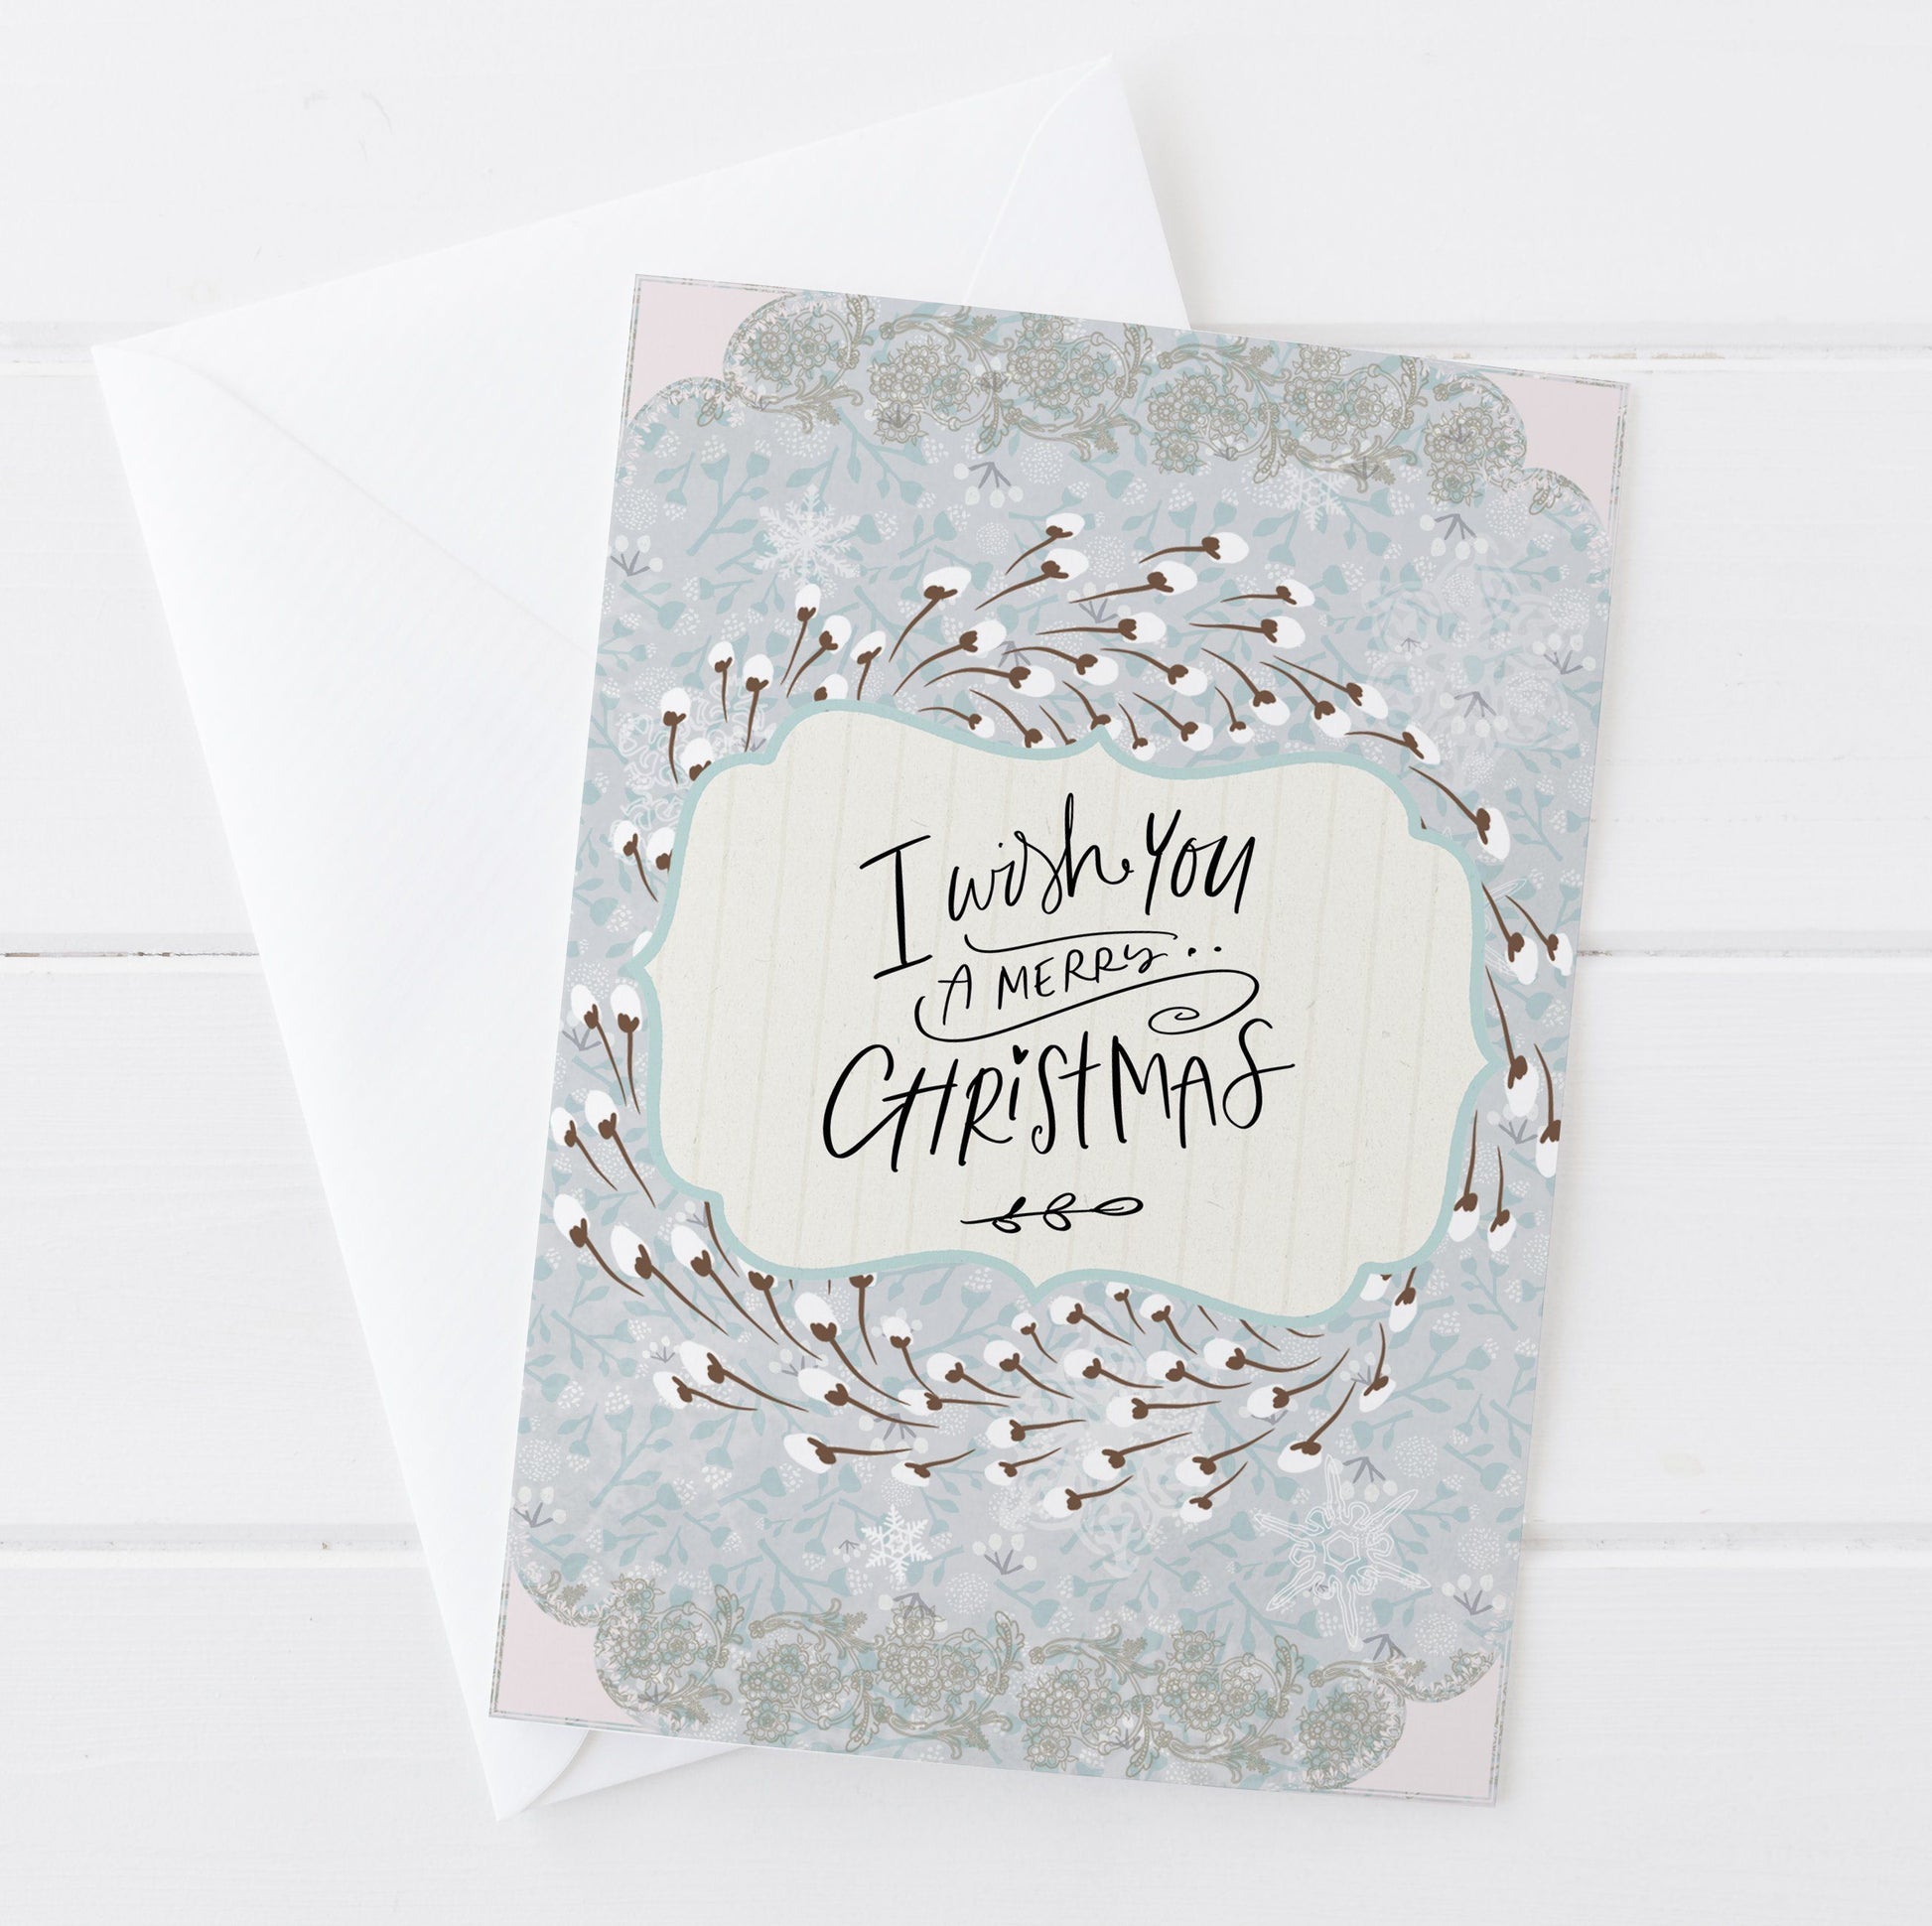 Merry Christmas wreath and Lace Christmas Card